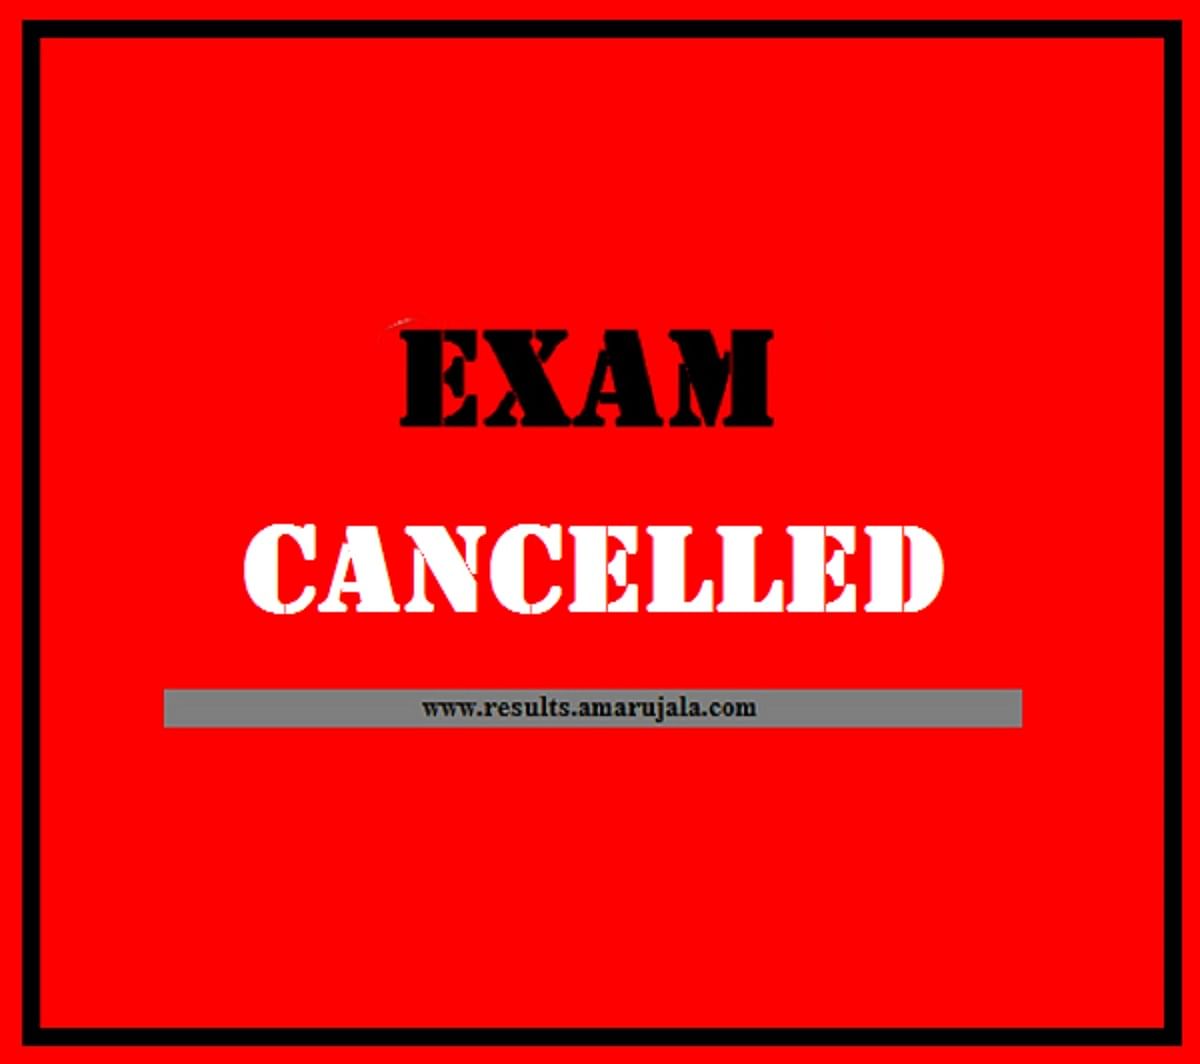 Amid COVID-19 Pandemic, ICAI CA July 2020 Exams Cancelled